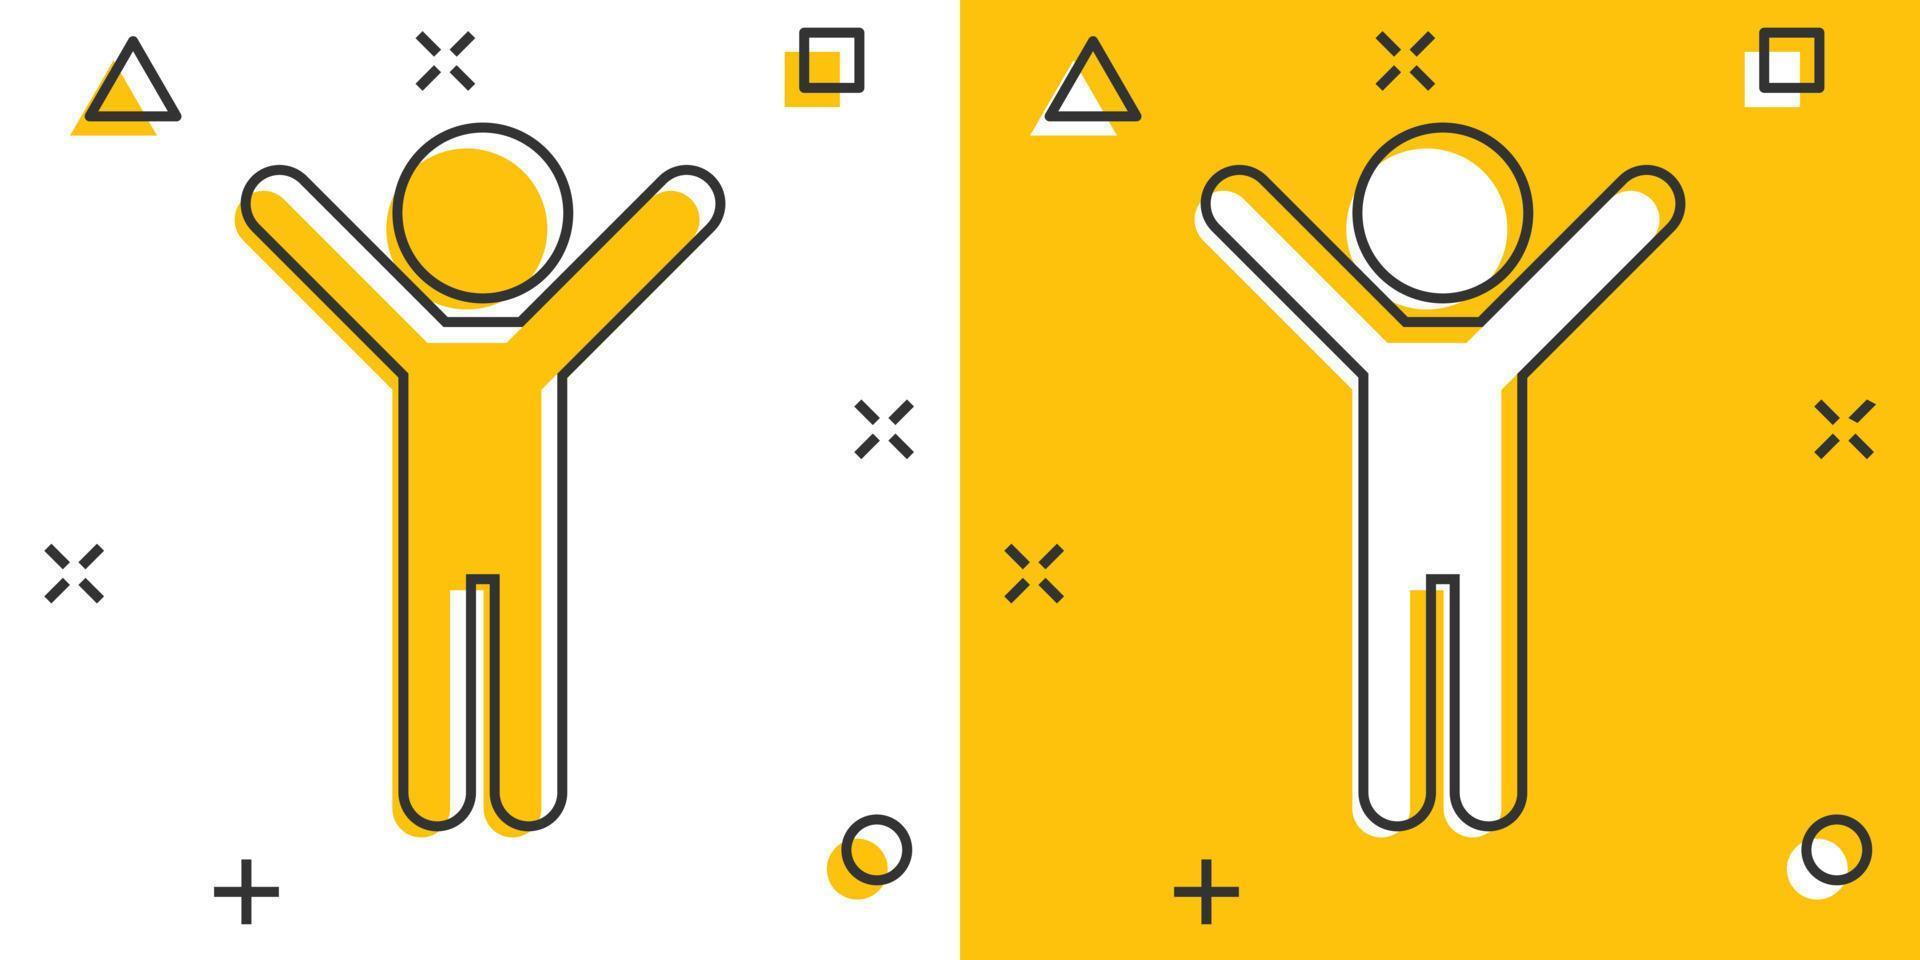 Vector cartoon happy man with hands up icon in comic style. People happy sign illustration pictogram. Man business splash effect concept.